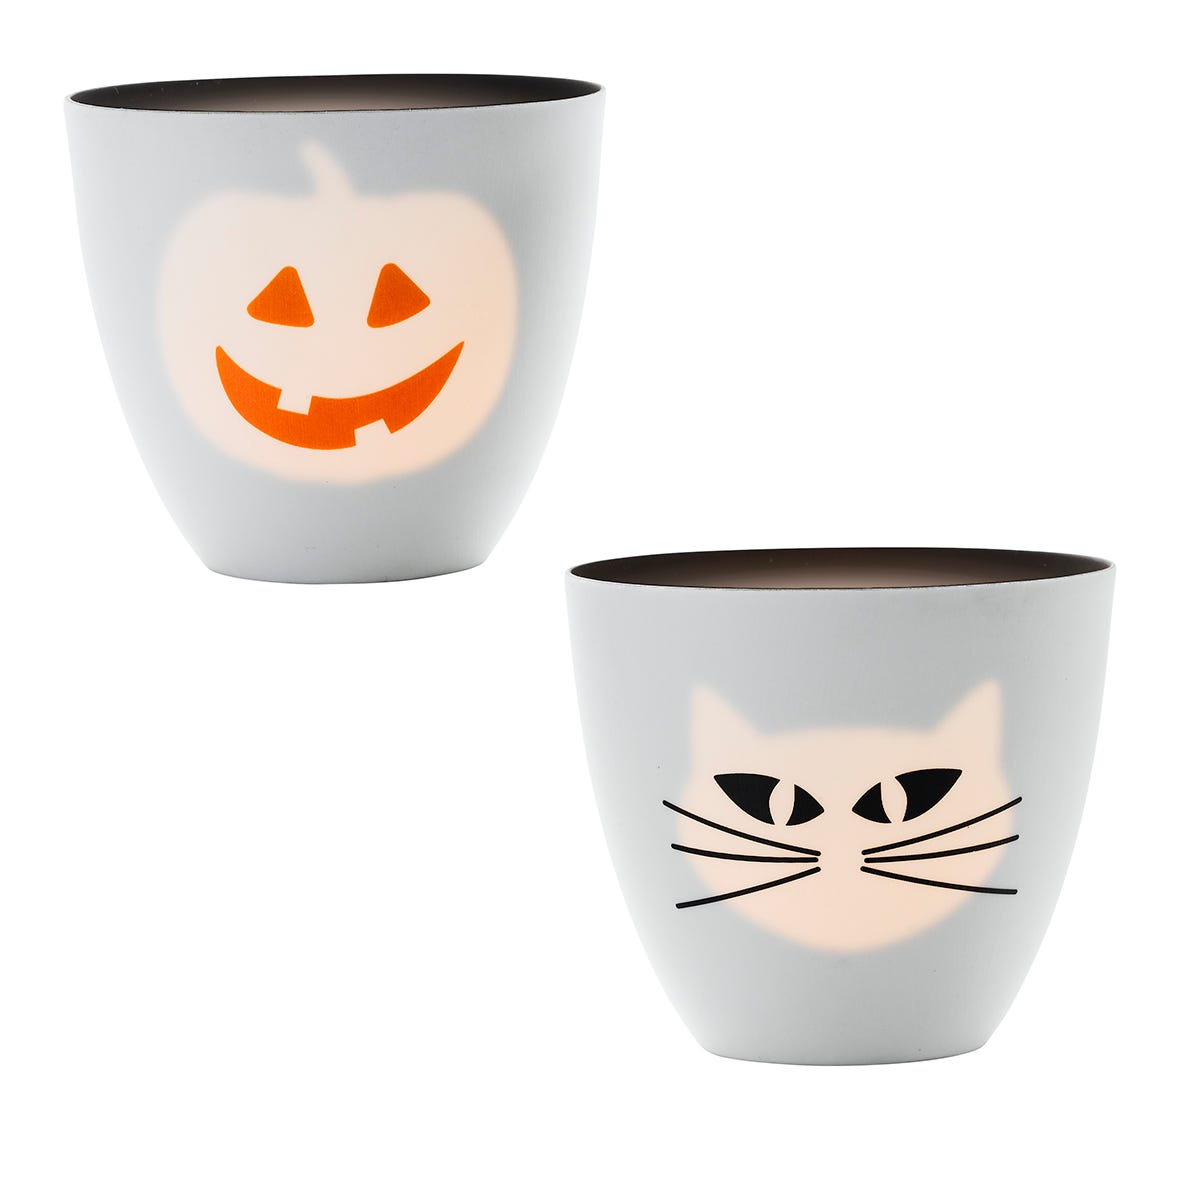 Spooky Shadow Faces Porcelain Tealight Candle Holder, Set of 2 - PartyLite US